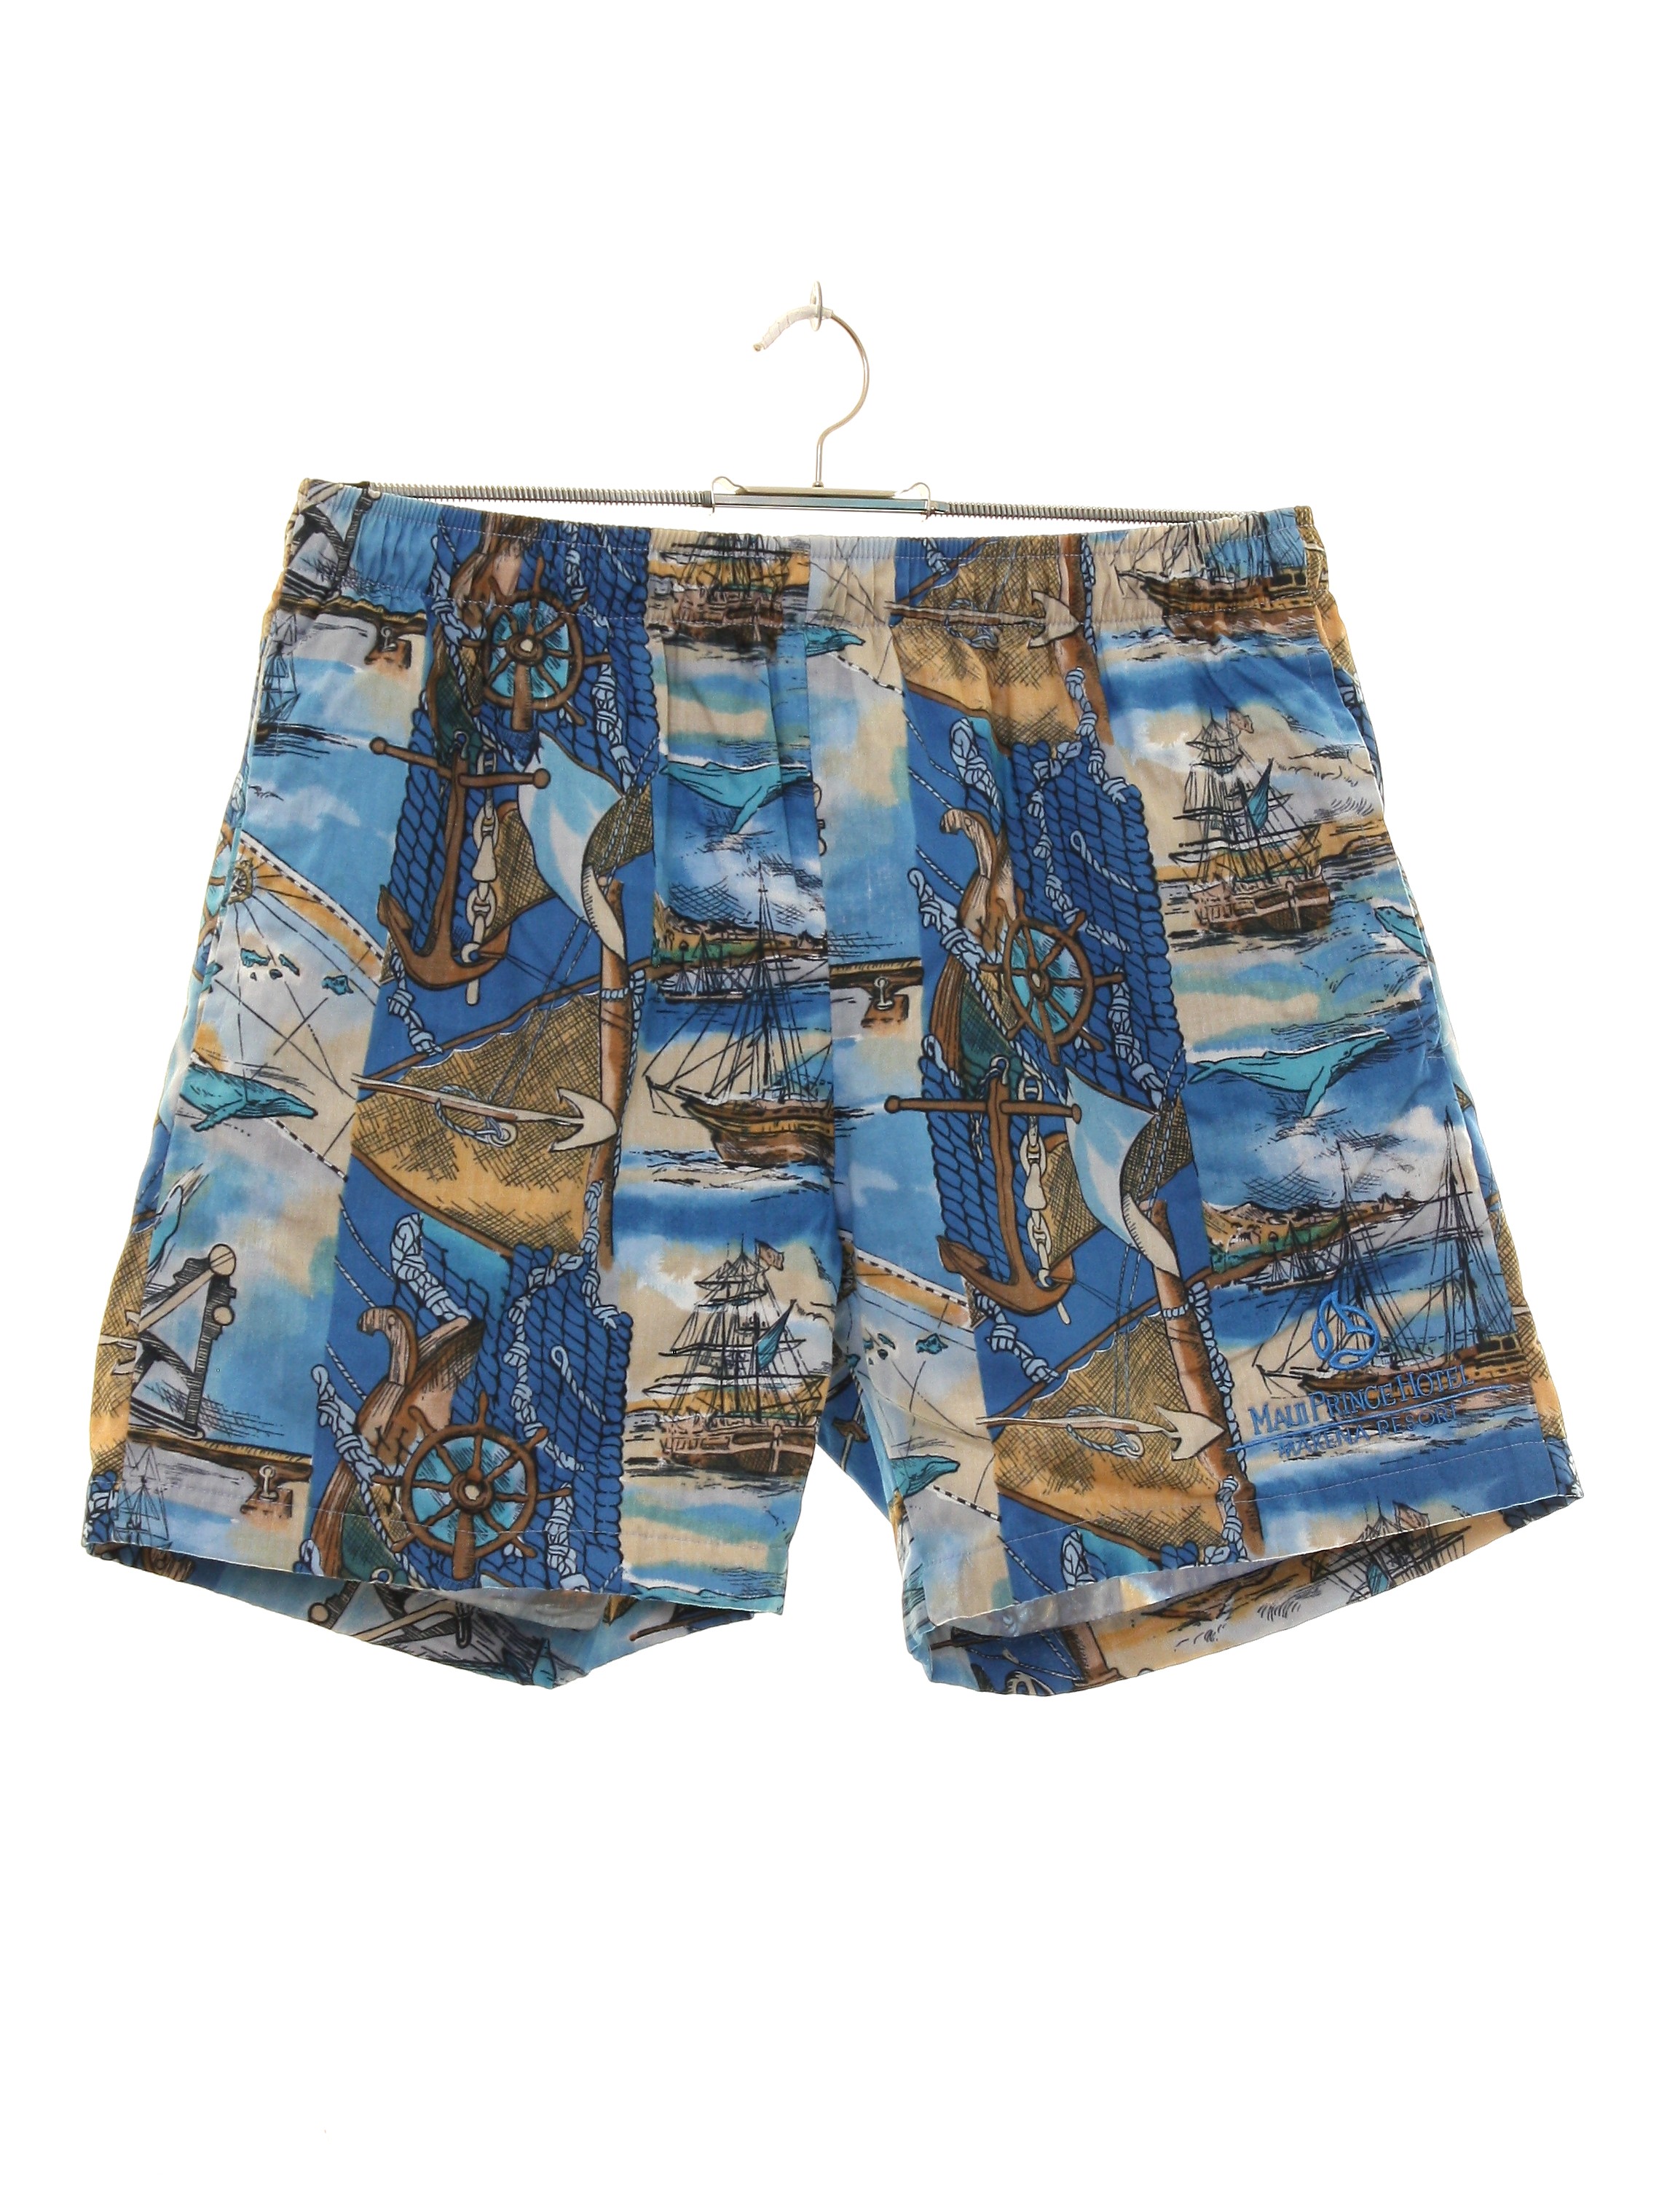 80's Vintage Shorts: 80s -Made in Hawaii- Mens shades of blue ...